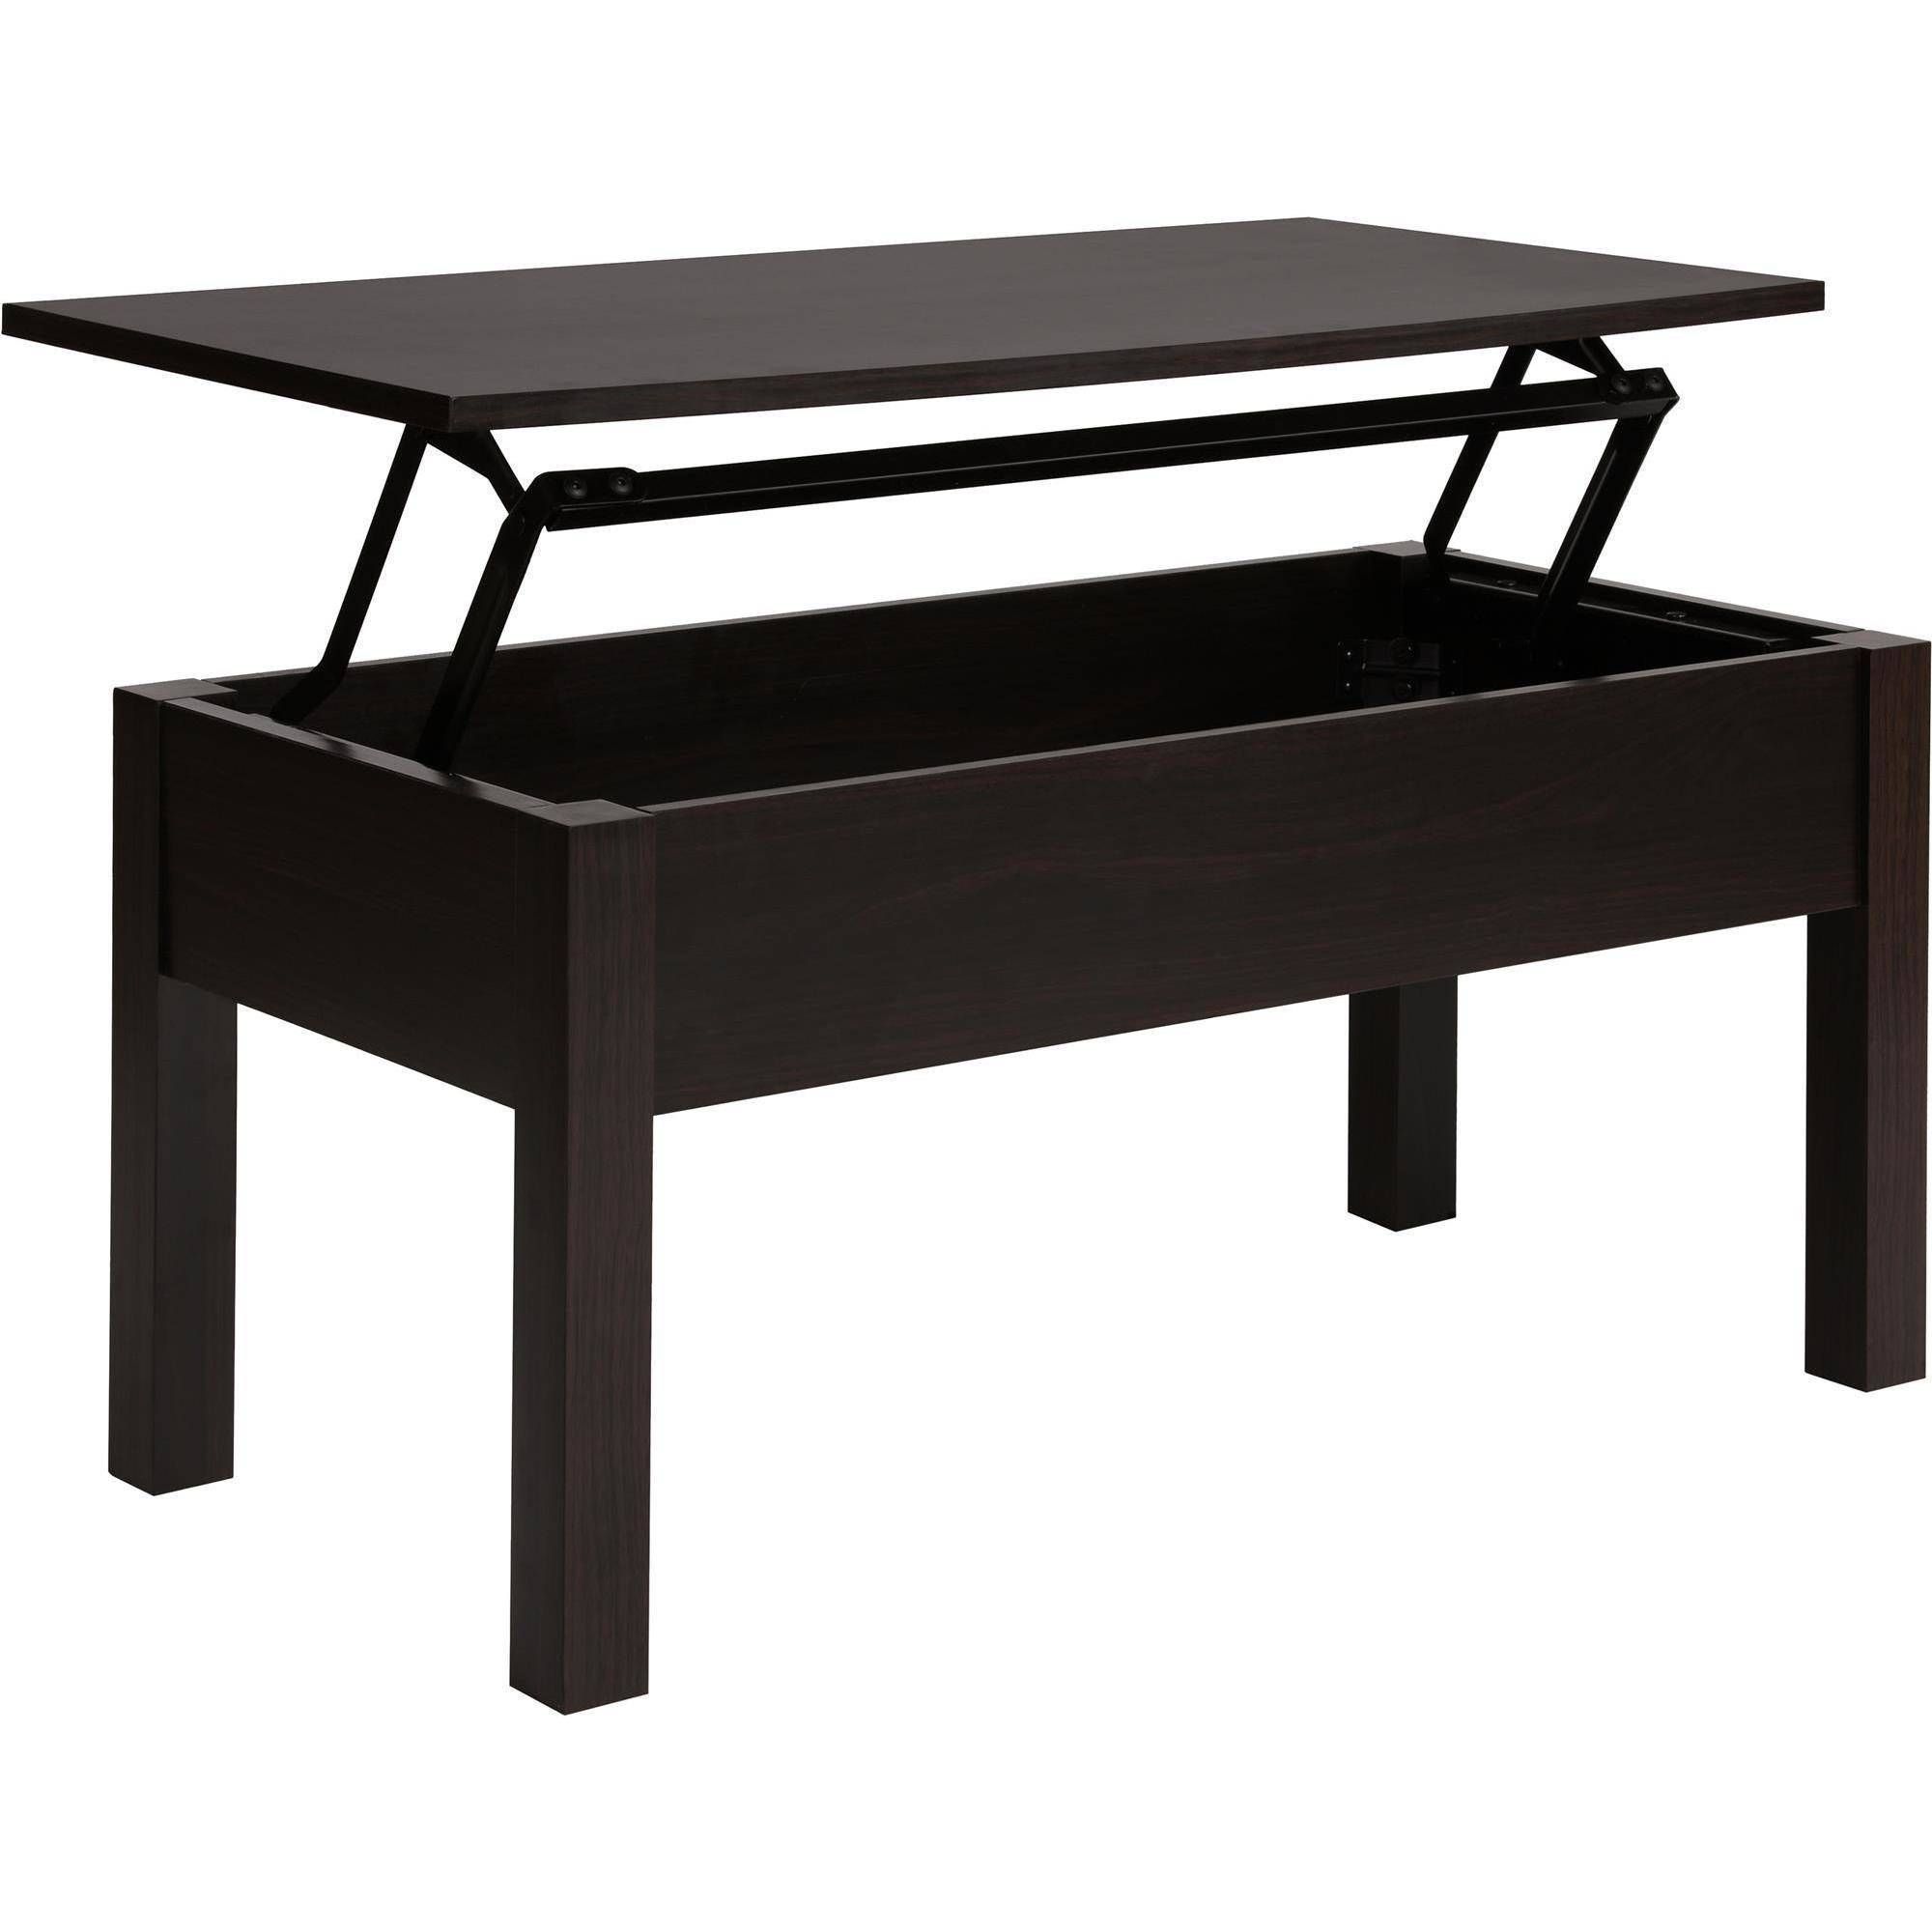 Mainstays Lift Top Coffee Table, Multiple Colors – Walmart With Lift Coffee Tables (View 4 of 30)